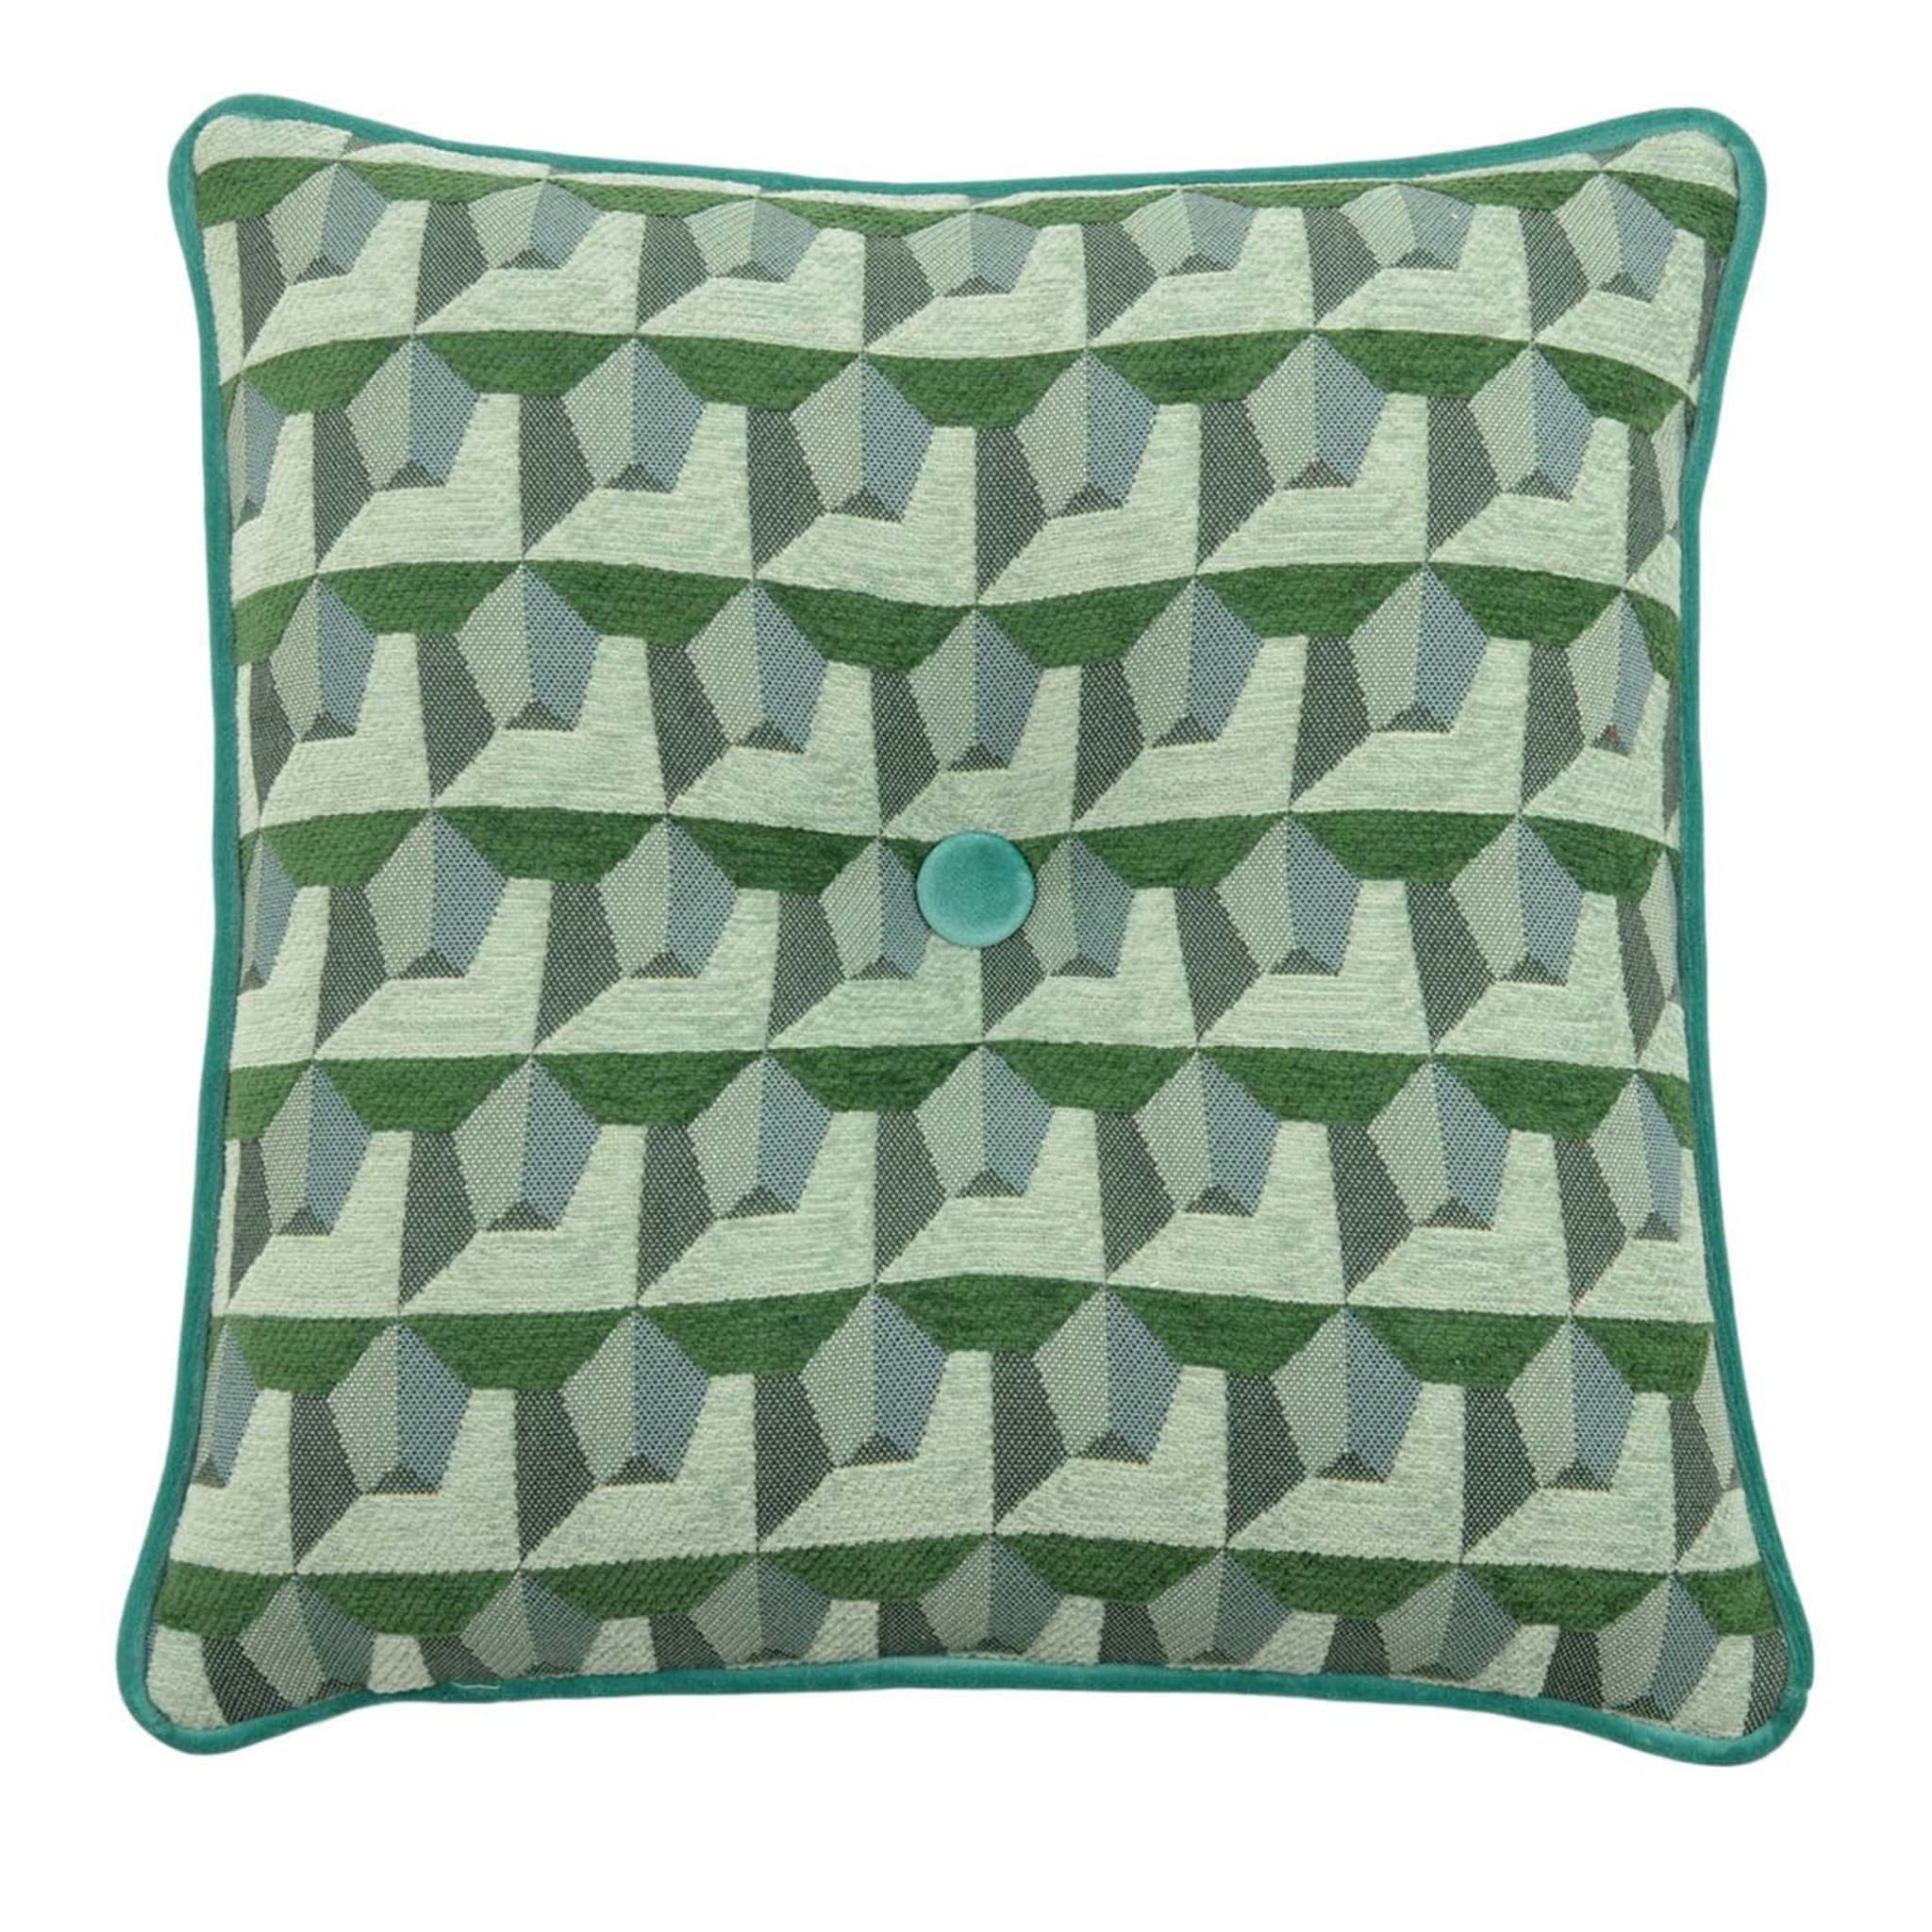 Carrè Green and Grey Patterned Throw Cushion - Main view